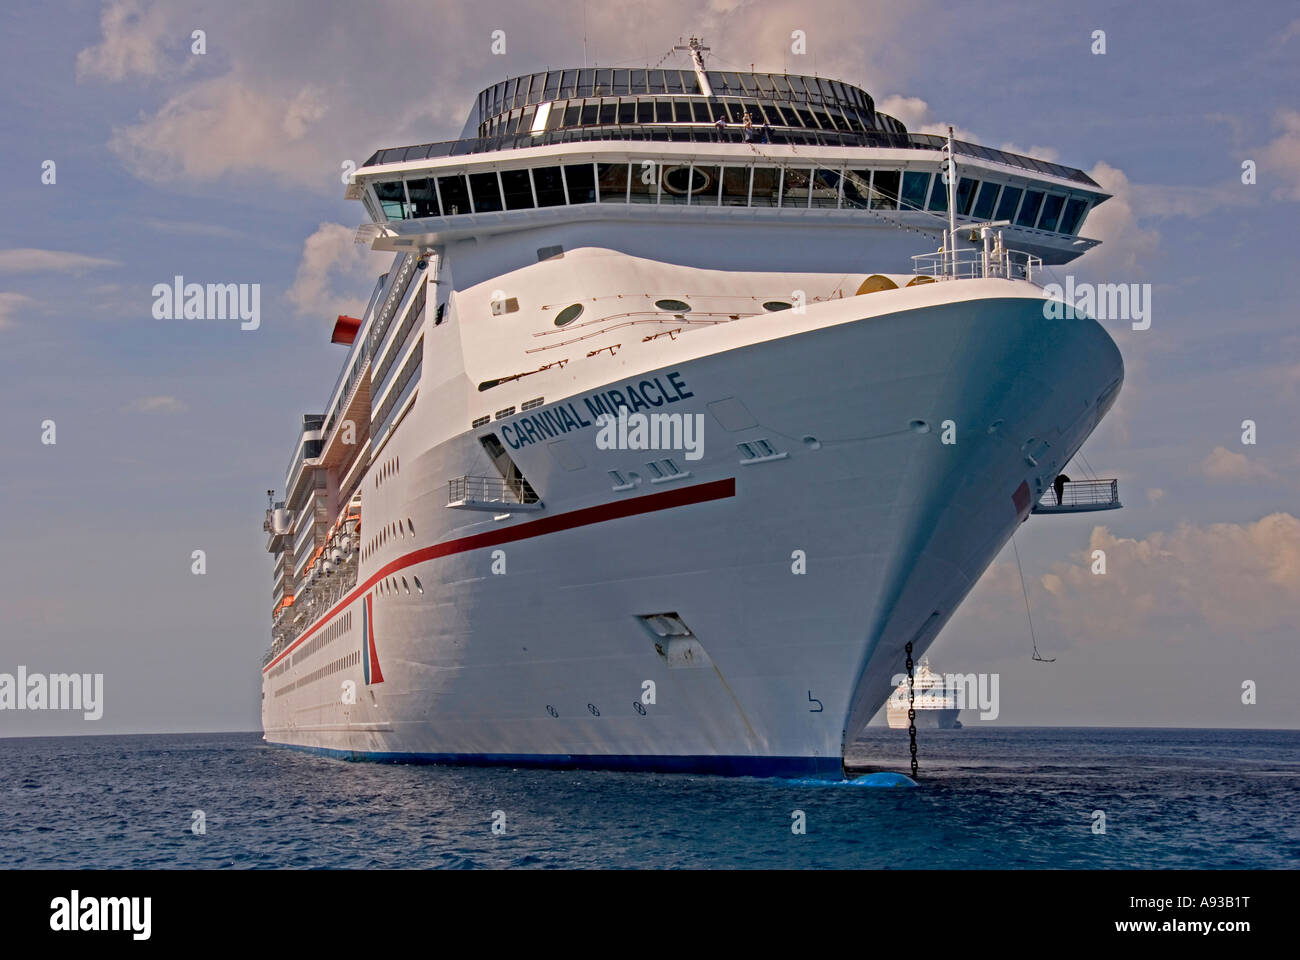 George Town Grand Cayman Carnival Miracle cruise ship Stock Photo